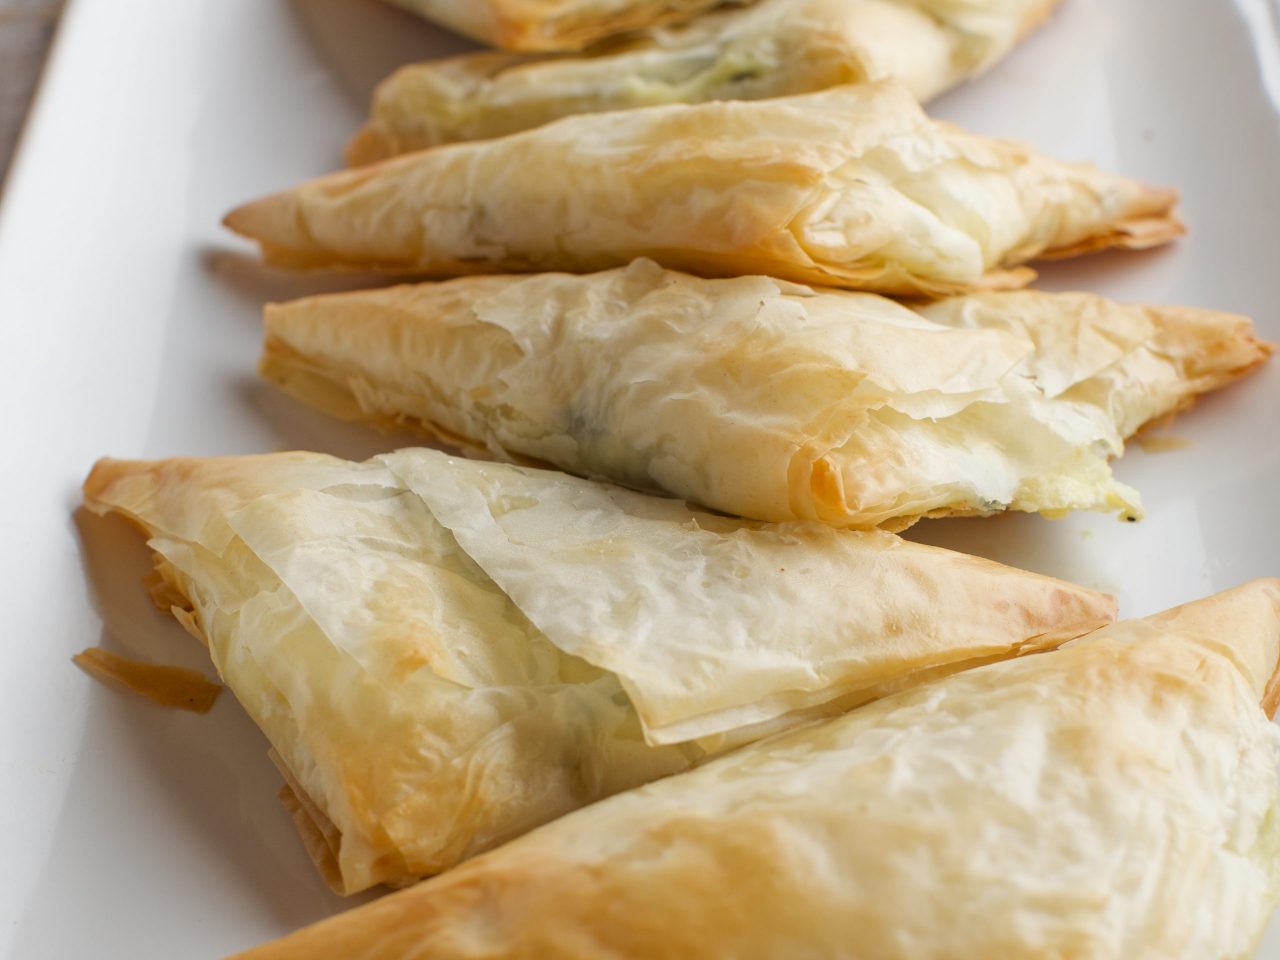 Ree Drummond's Spinach Phyllo Hand Pie, as seen on The Pioneer Woman, Season 19.